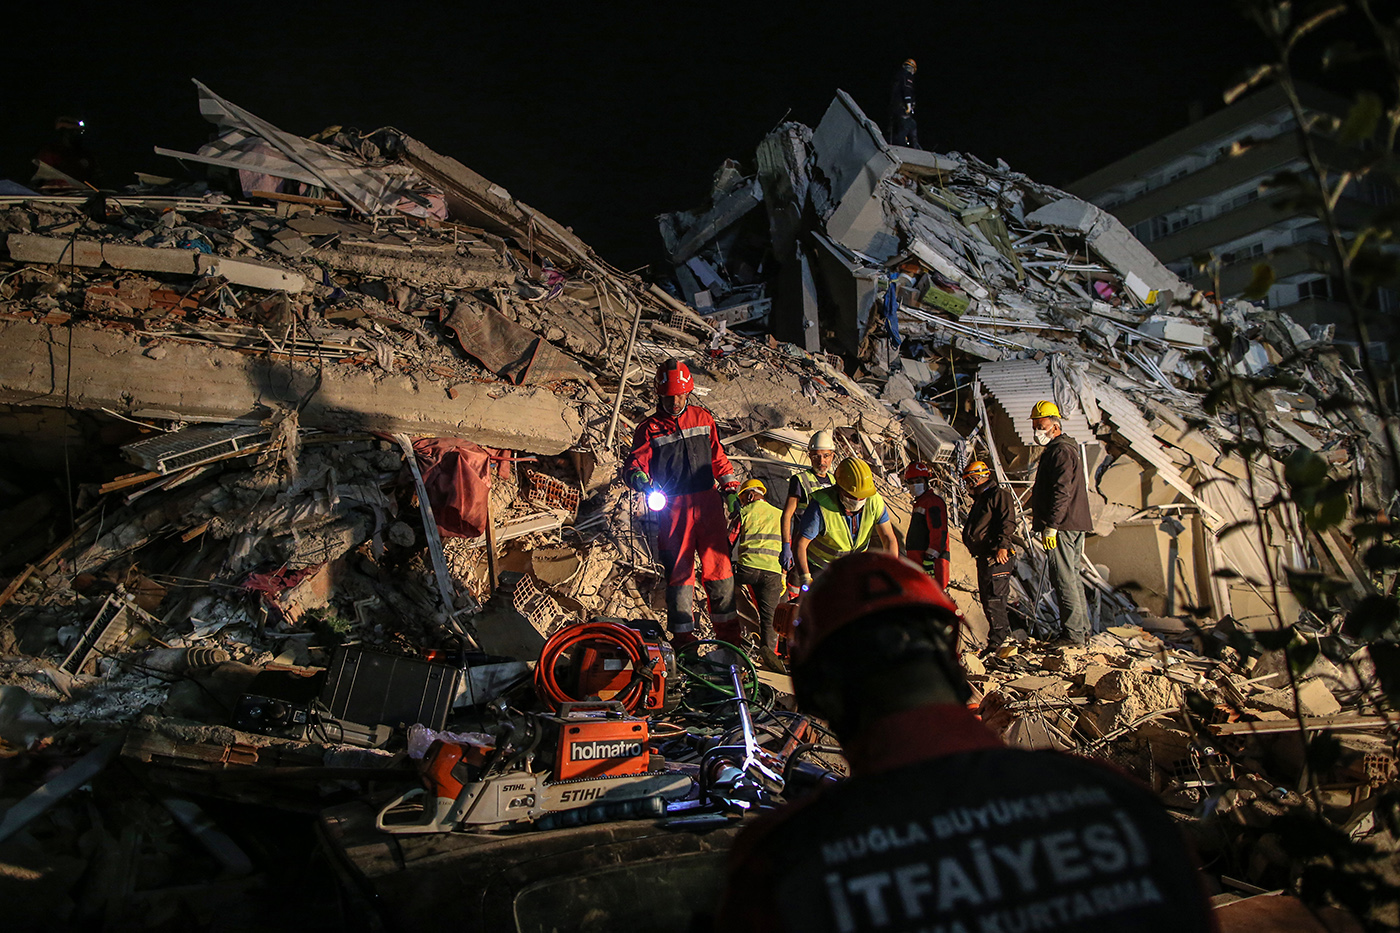 Rescue workers and people search for survivors at a collapsed building after a 7.0 magnitude earthquake in the Aegean Sea, at Bayrakli district in Izmir, Turkey, 31 October 2020. According to Turkish media reports, at least twenty people died while more than eight  hundreds were injured and dozens of buildings were destroyed in the earthquake.